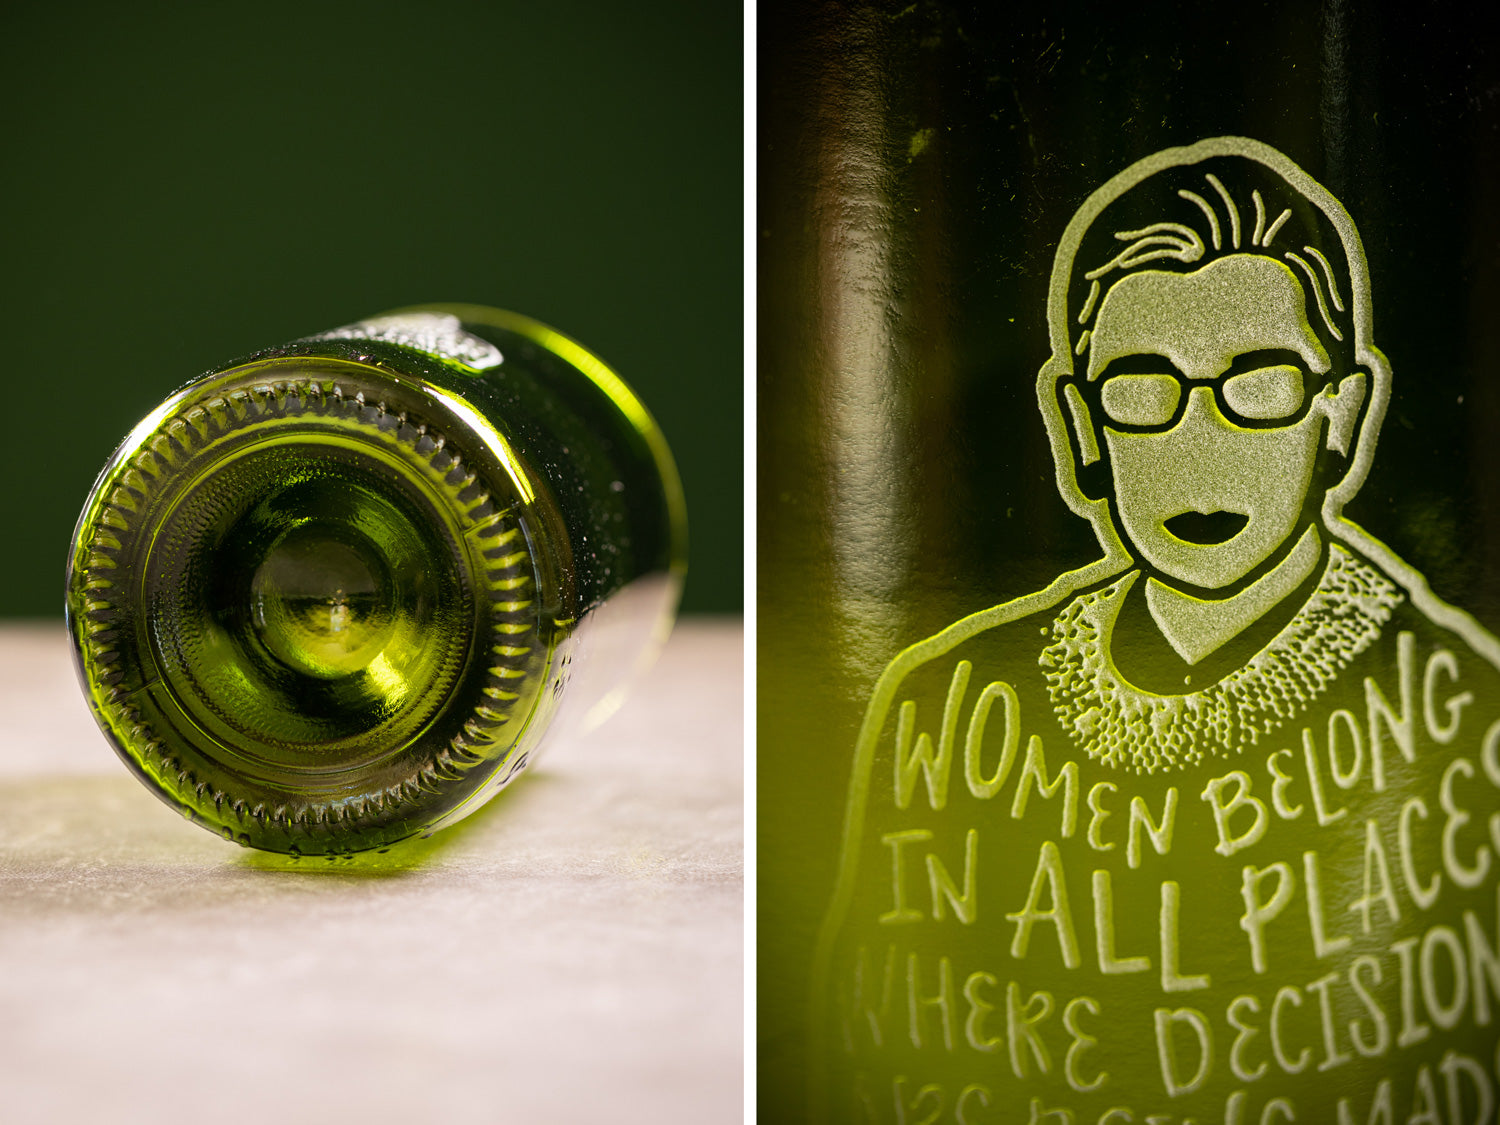 Bordeaux green glass wine bottle recycled into a wine tumbler; sand-carved with illustration of Ruth Bader Ginsburg